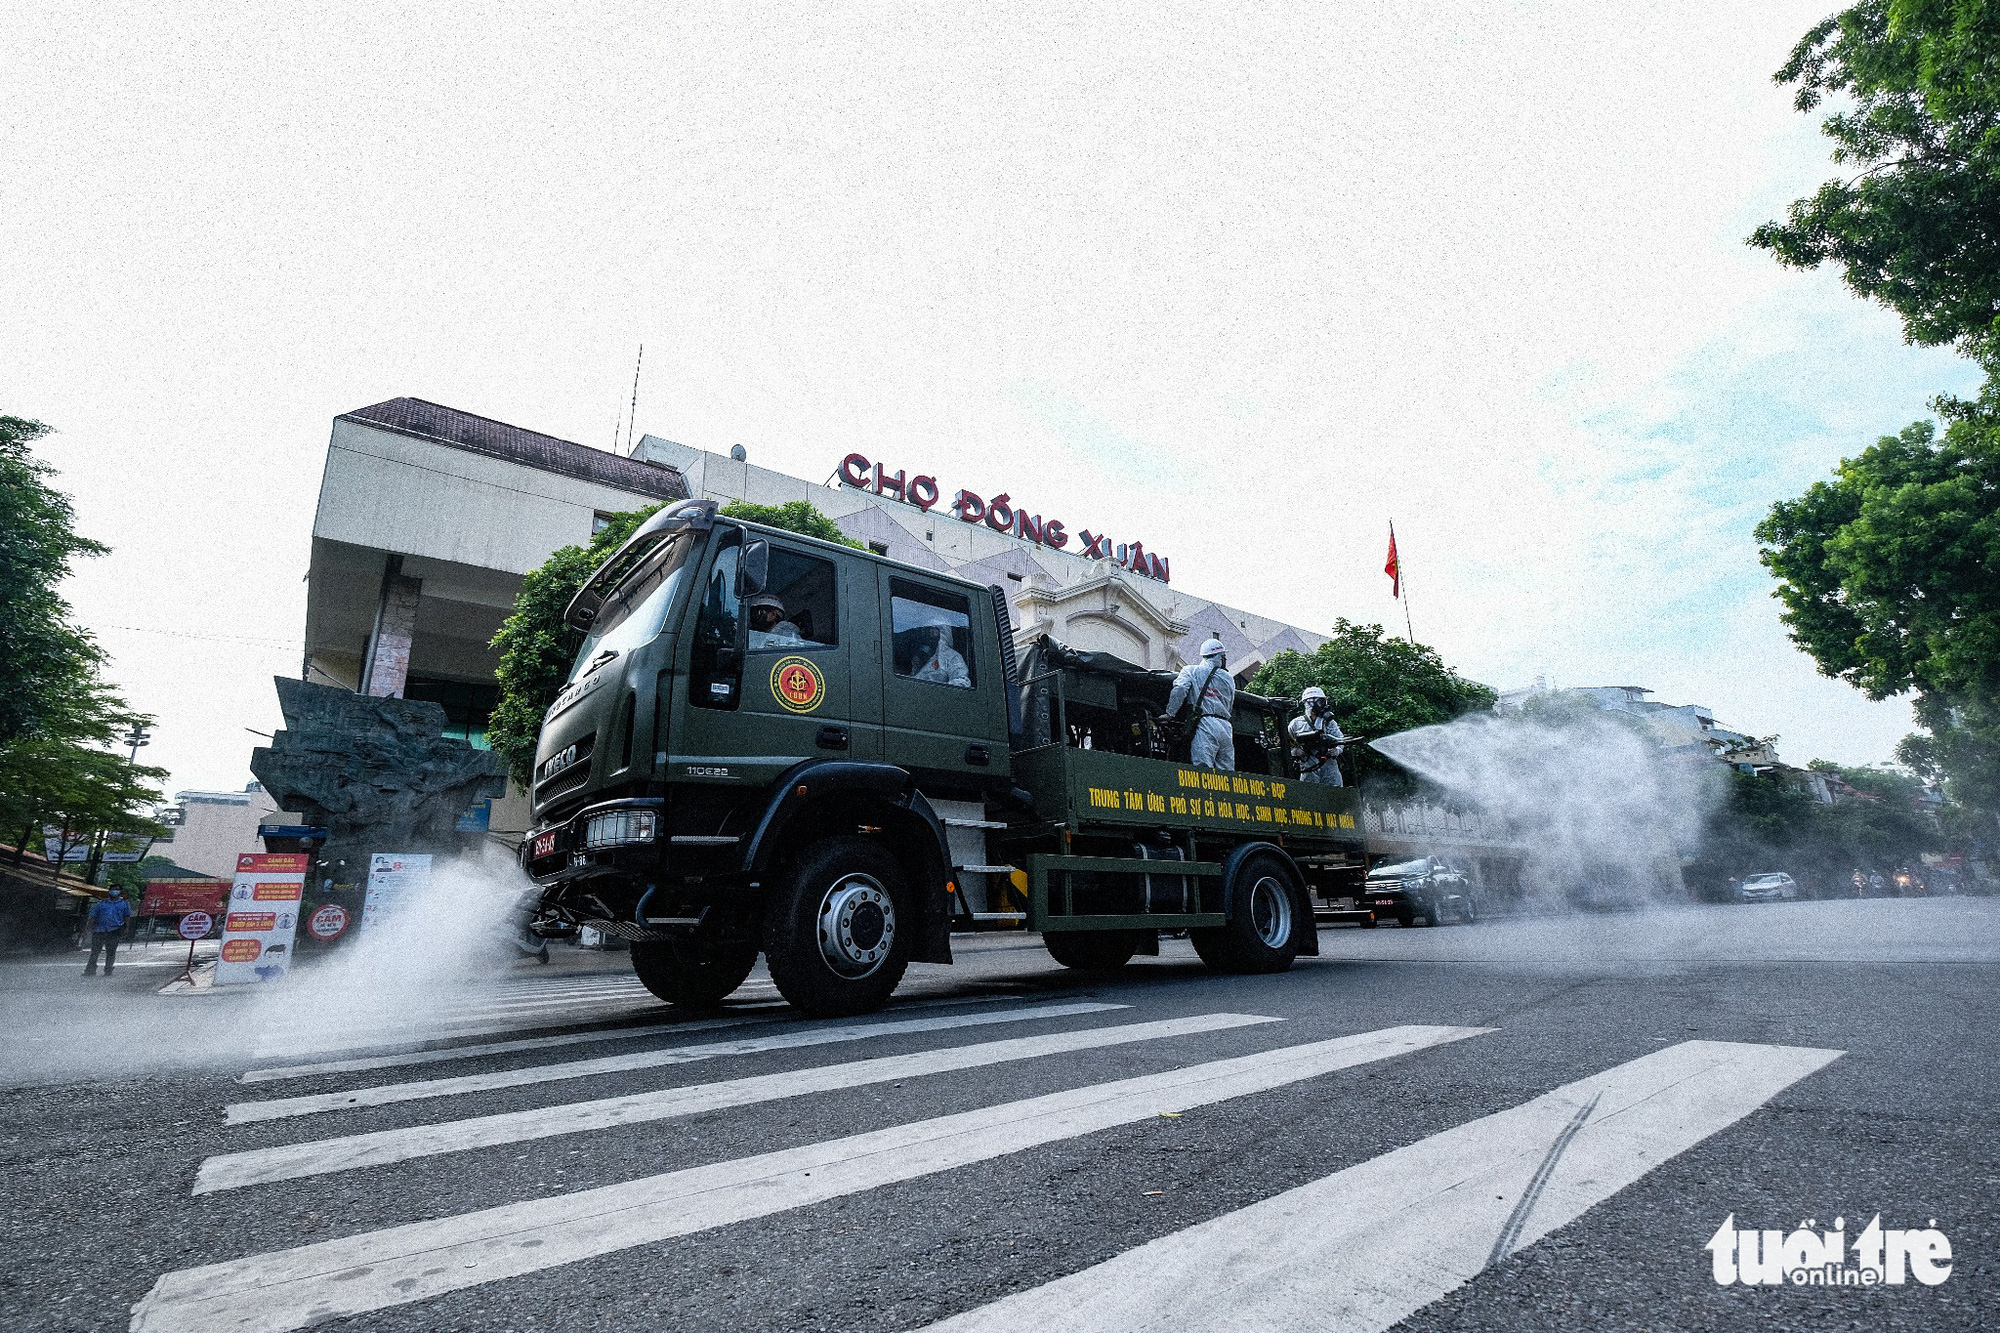 This image shows a specialized vehicle spraying chemicals to disinfect a street in Hoan Kiem District, Hanoi, July 26, 2021. Photo: Nam Tran / Tuoi Tre